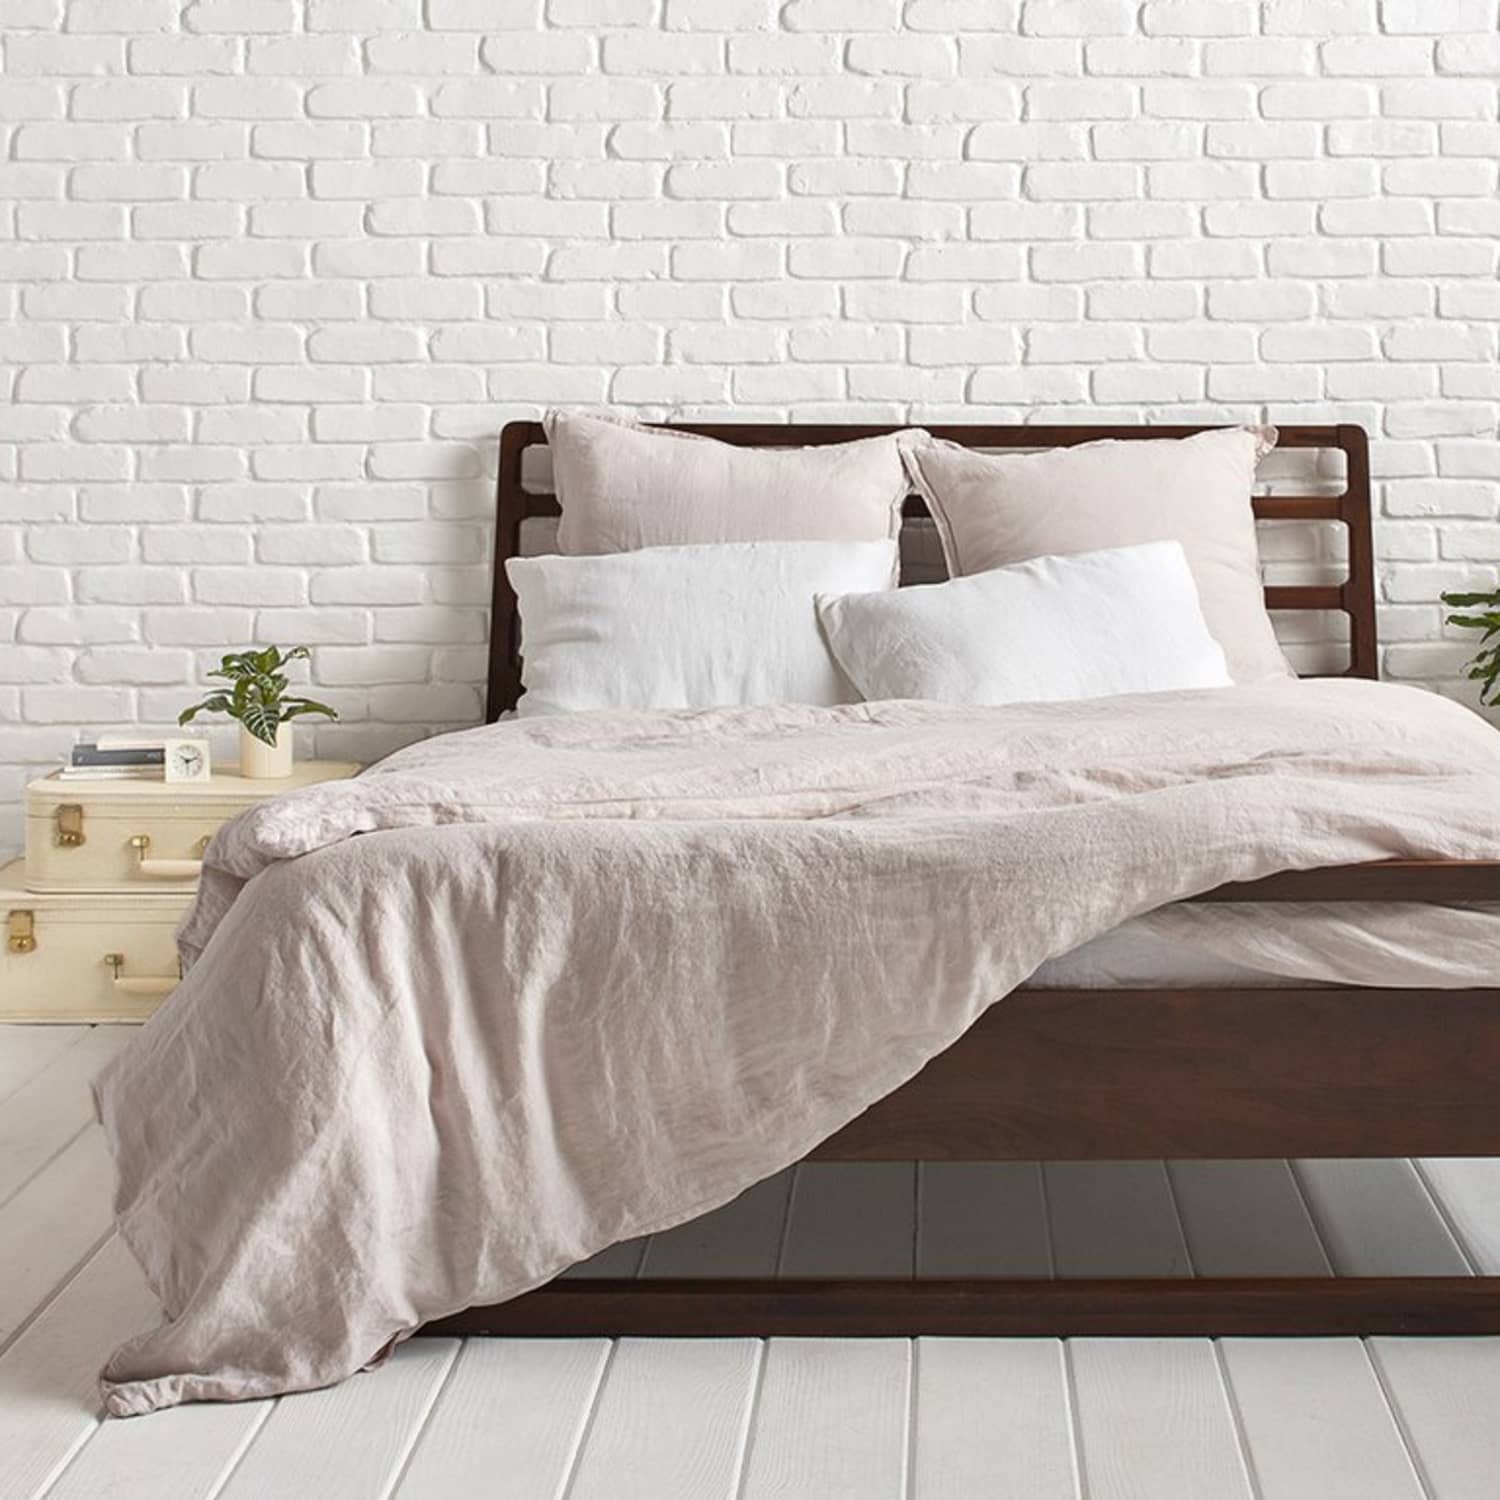 The Best Cotton And Linen Duvet Covers For A Great Night S Sleep